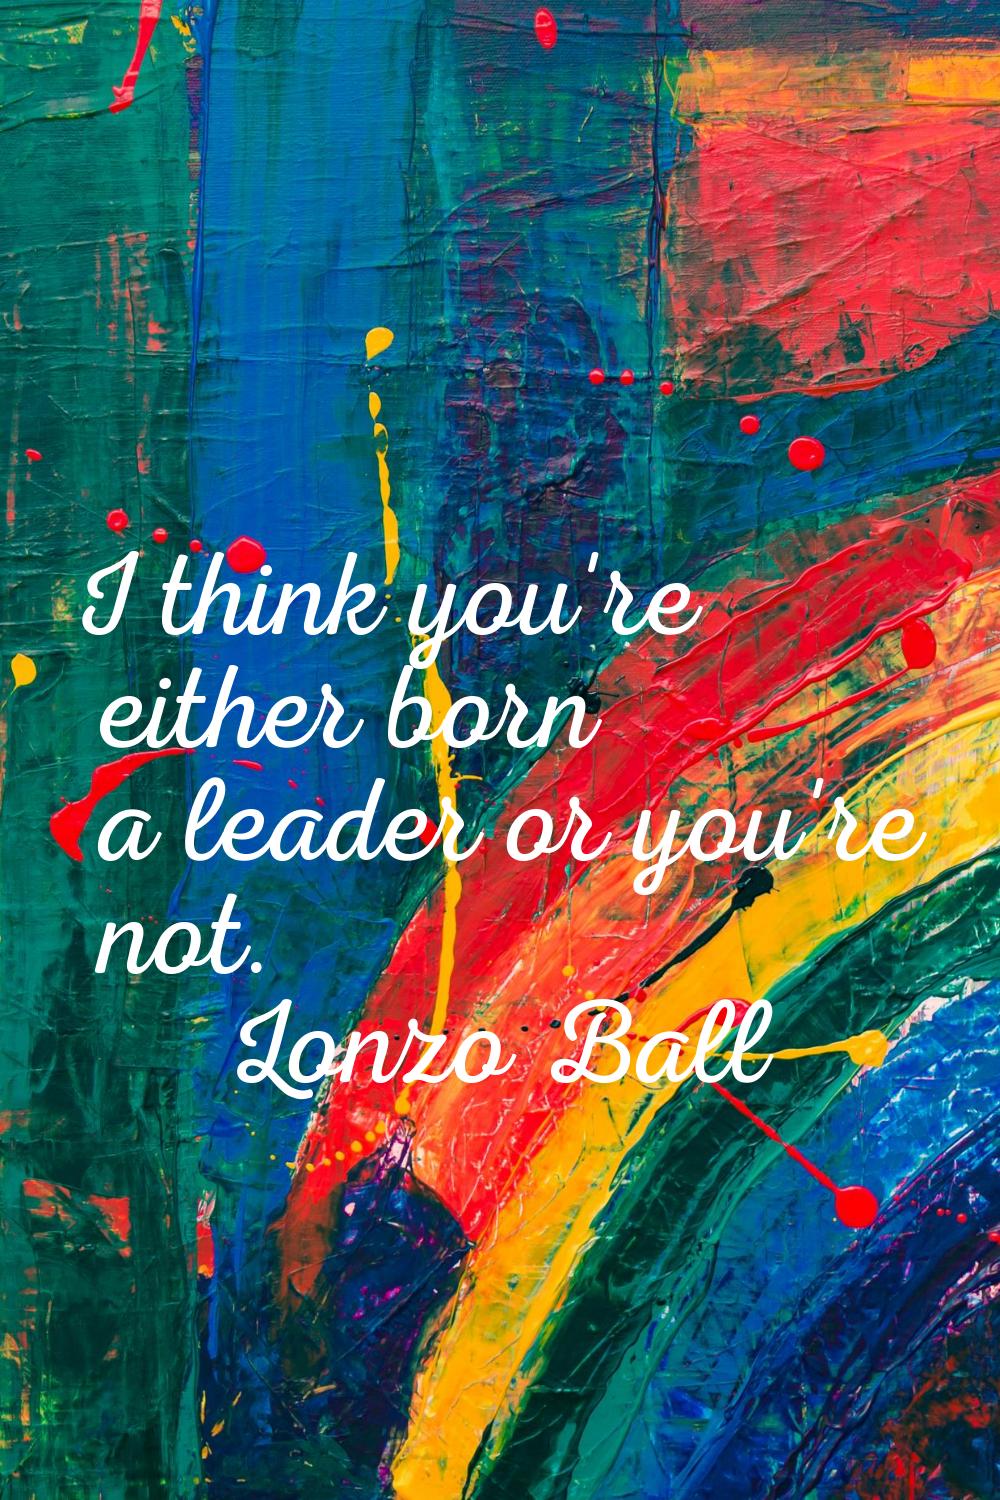 I think you're either born a leader or you're not.